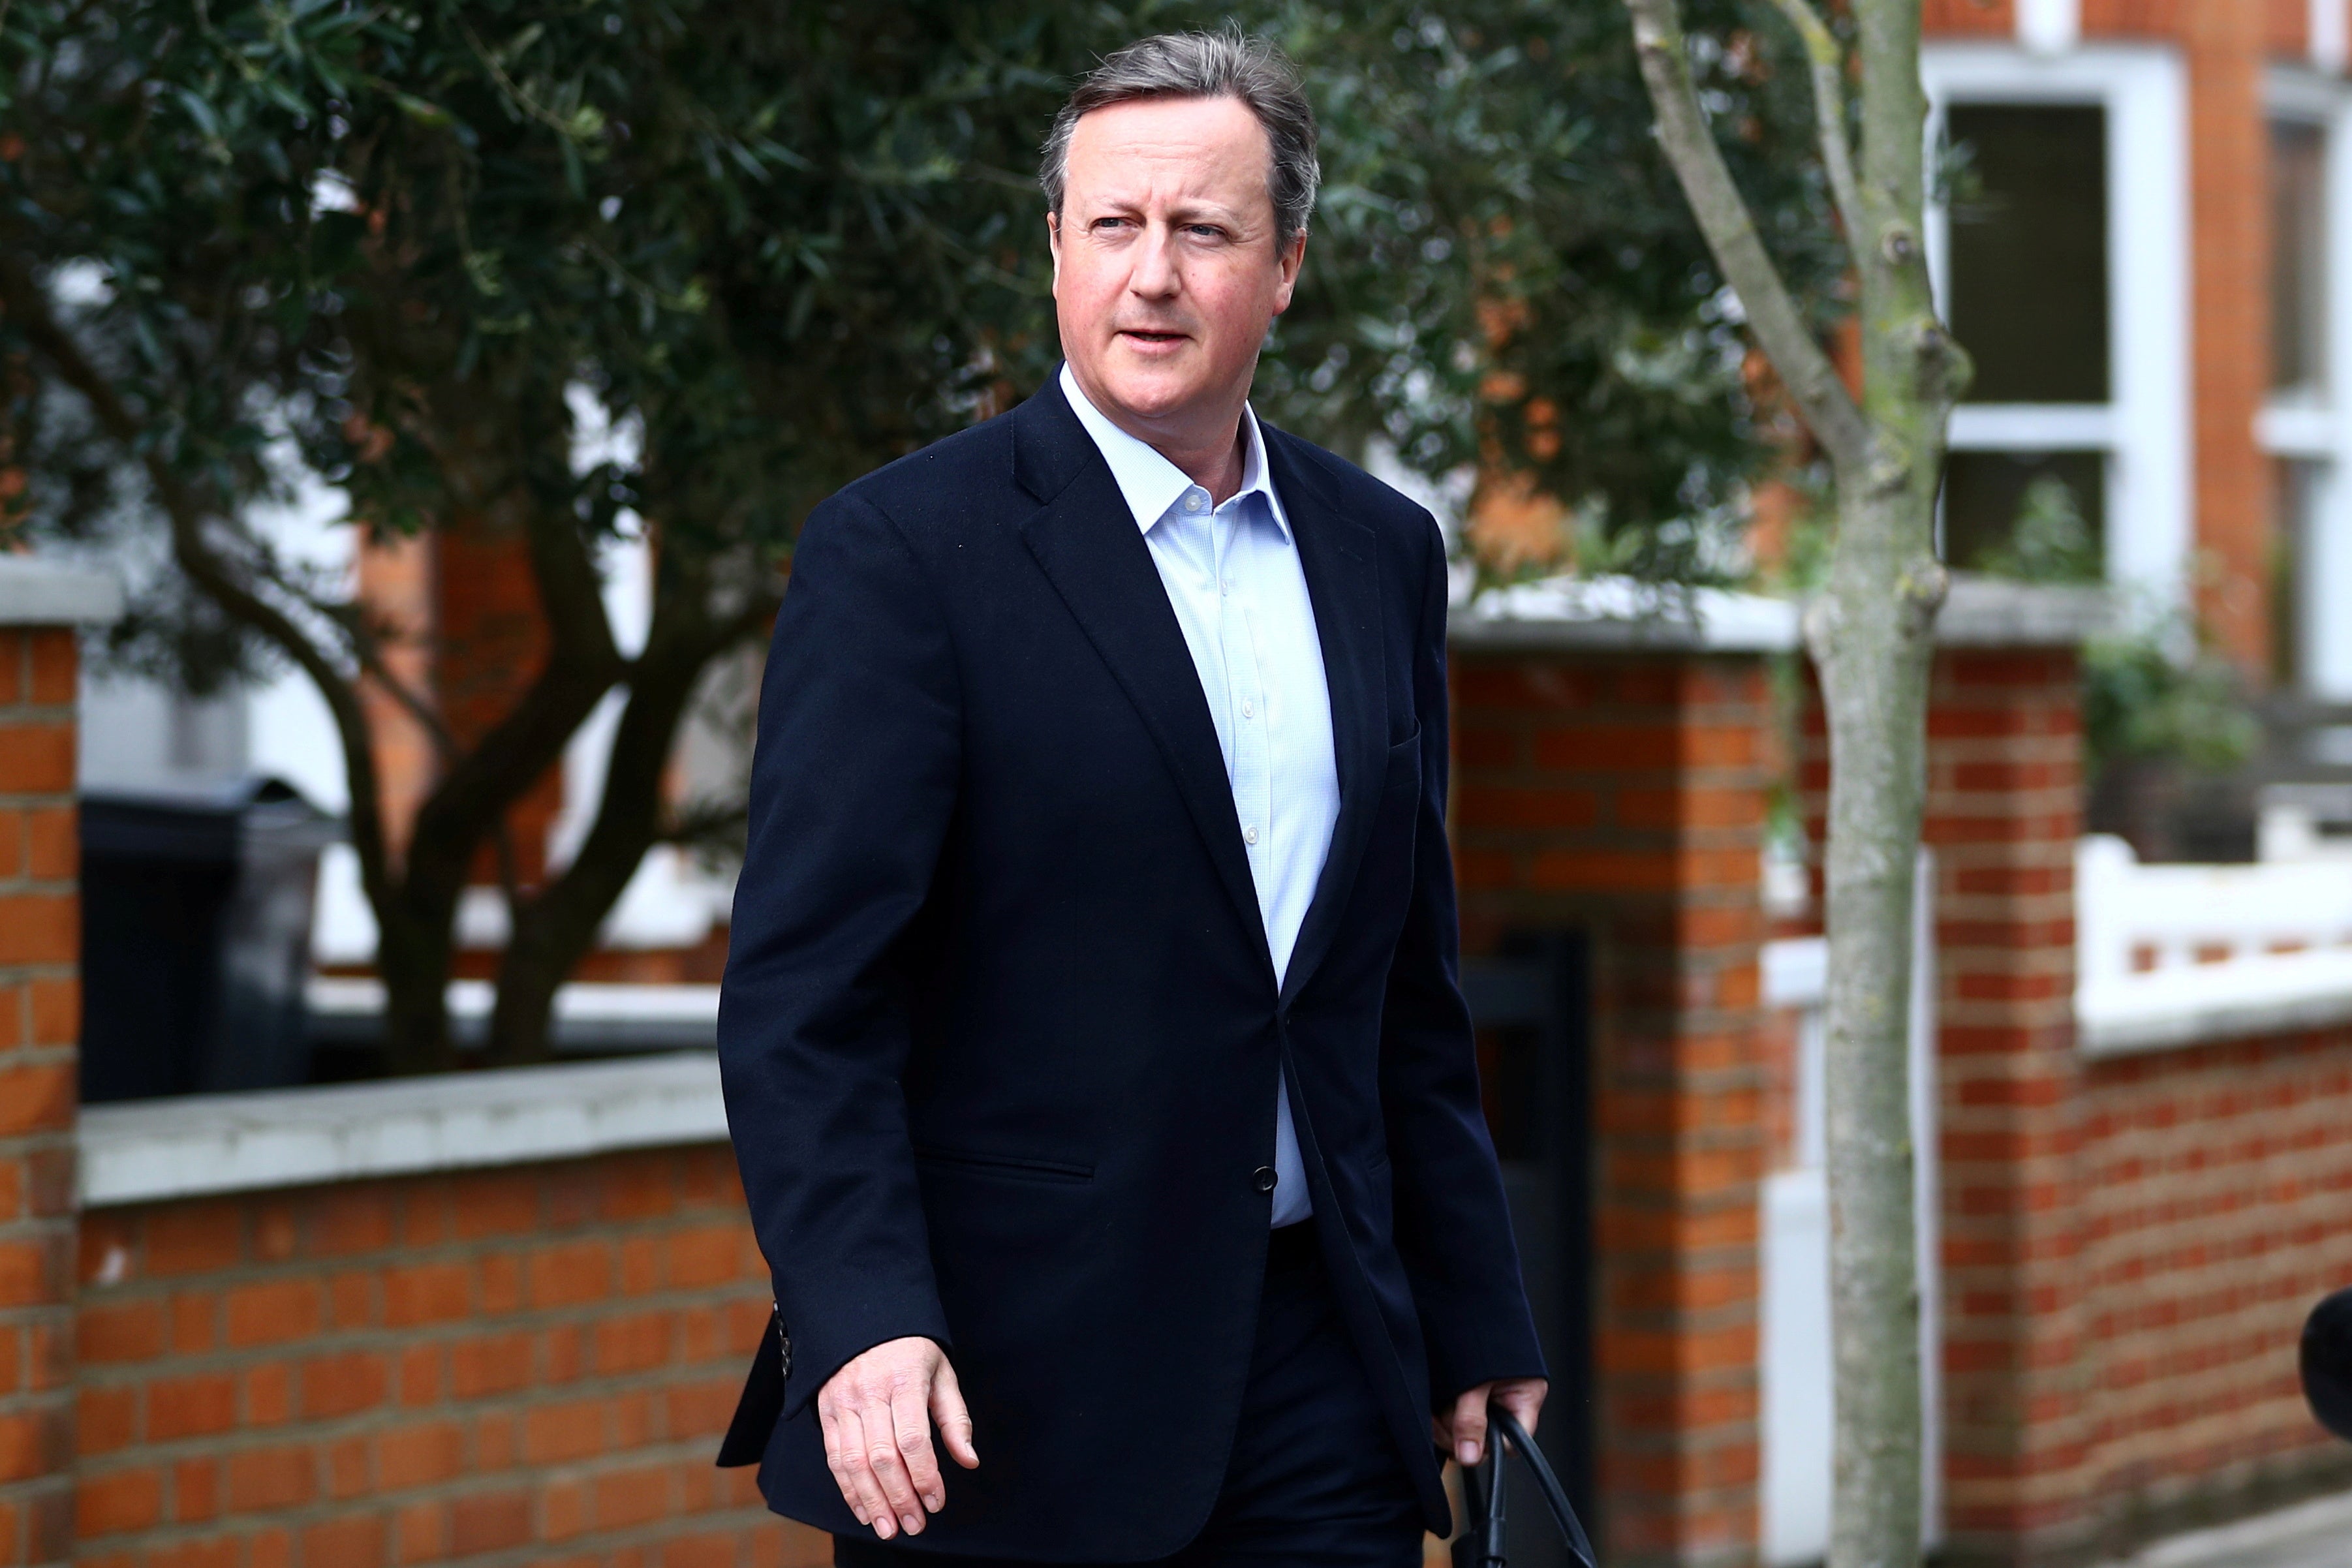 Without Cameron’s intervention there would be no deal – not in that timeframe